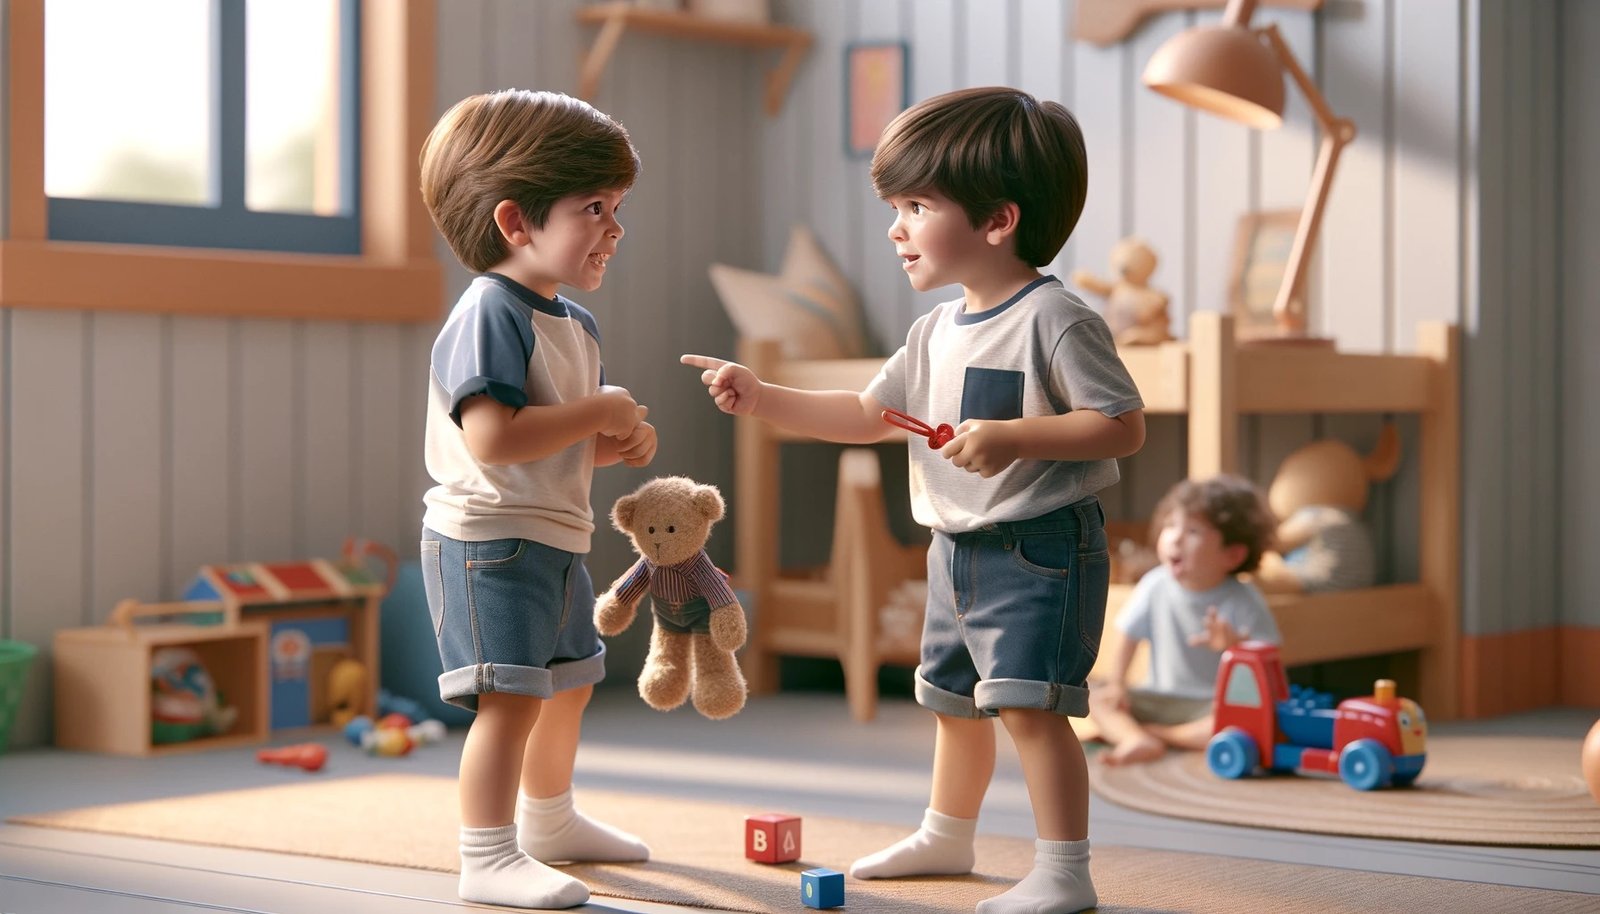 Two young brothers having an argument over a teddy bear.